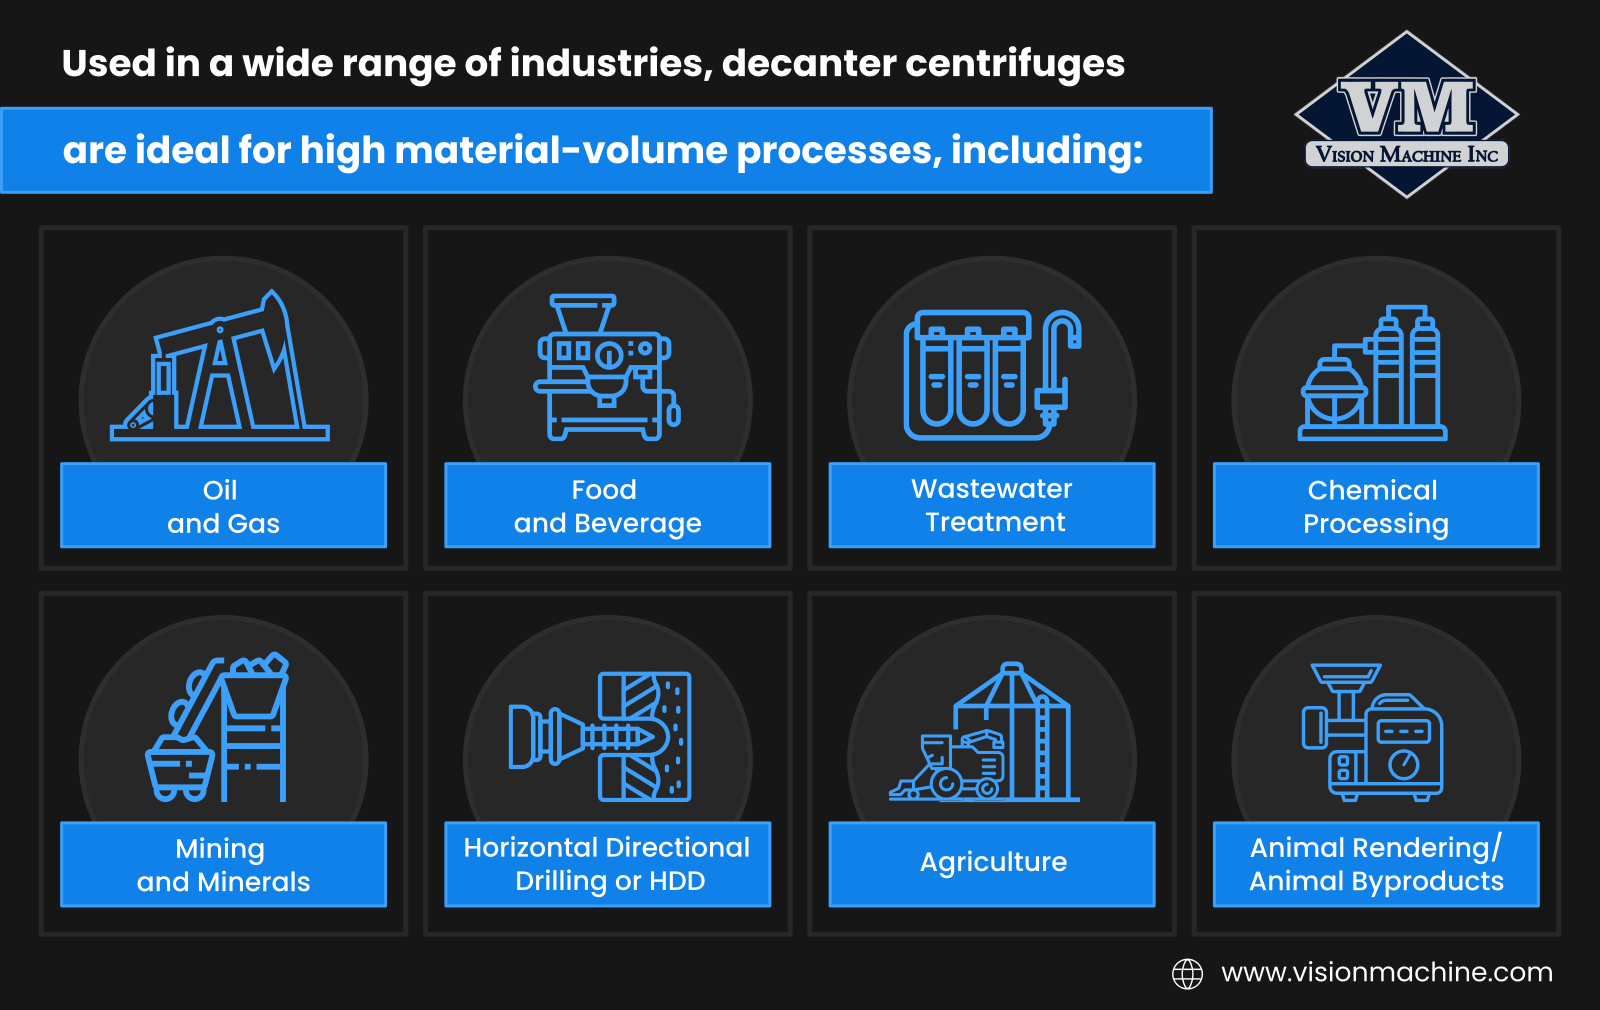 Used in a wide range of industries, decanter centrifuges are ideal for high material-volume processes 